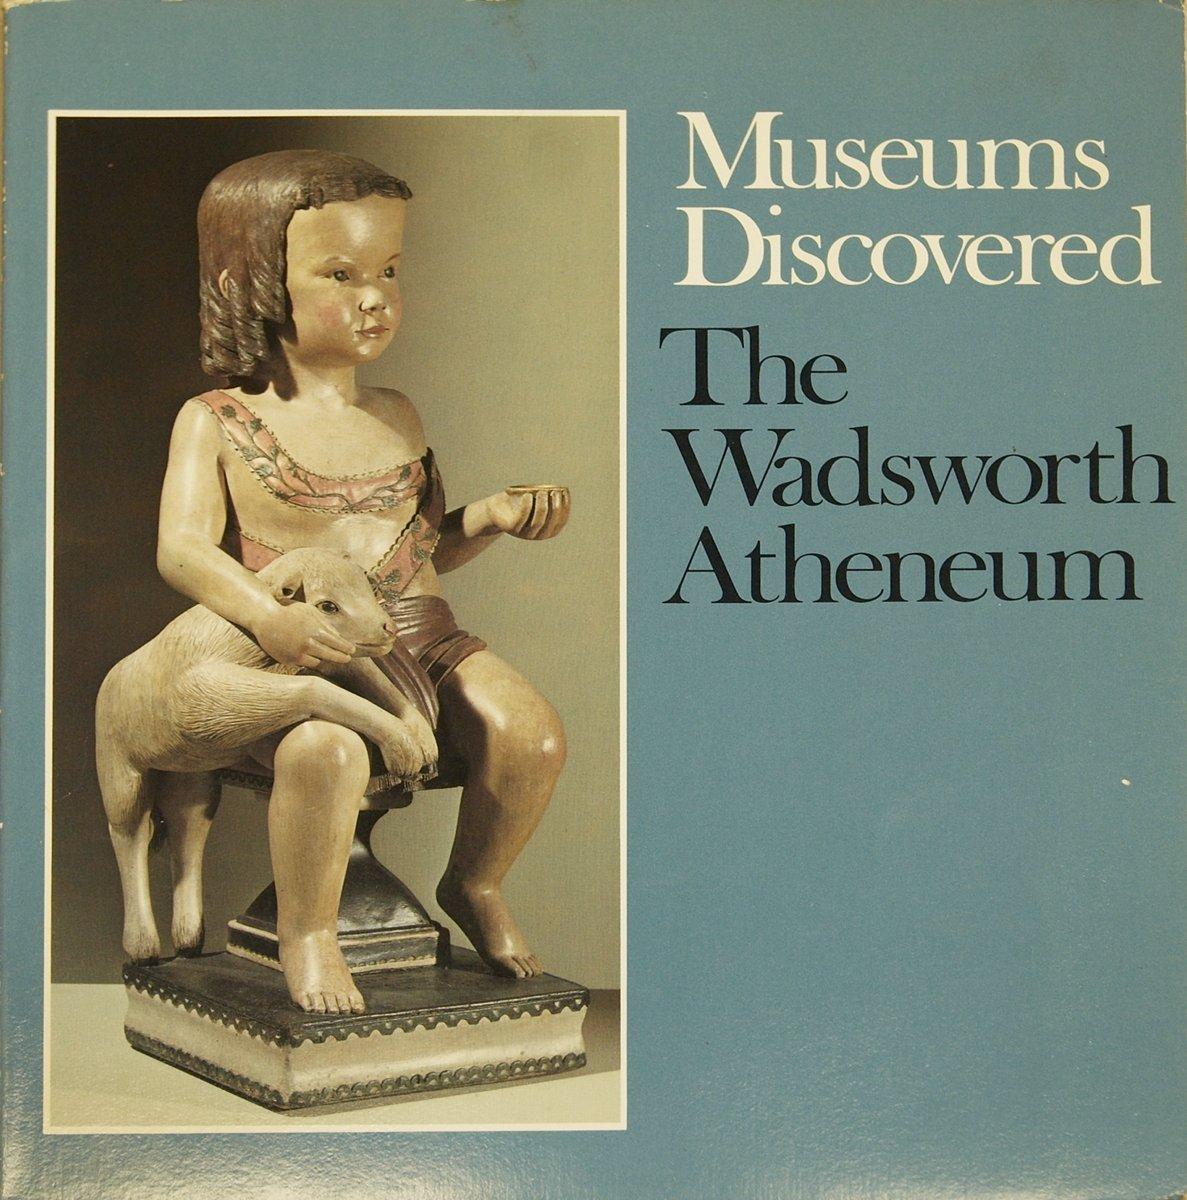 1982 Gerard Silk 'Museums Discovered: The WadsWorth Atheneum' Blue, Brown Book - Print by Unknown